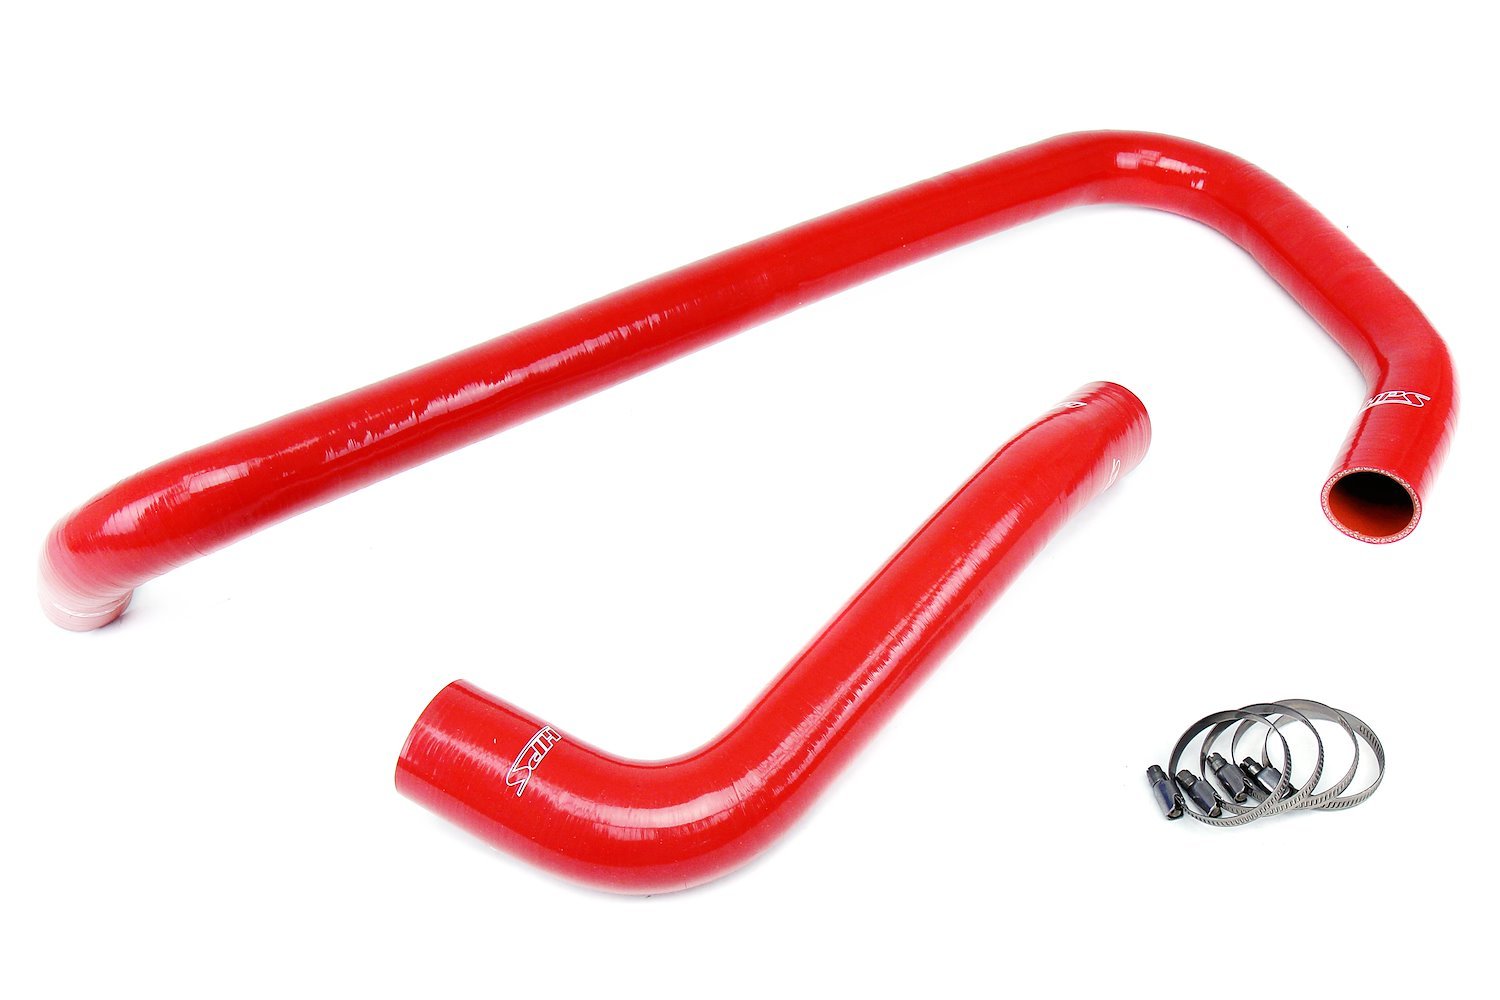 57-1818-RED Radiator Hose Kit, 3-Ply Reinforced Silicone, Replaces Rubber Radiator Coolant Hoses